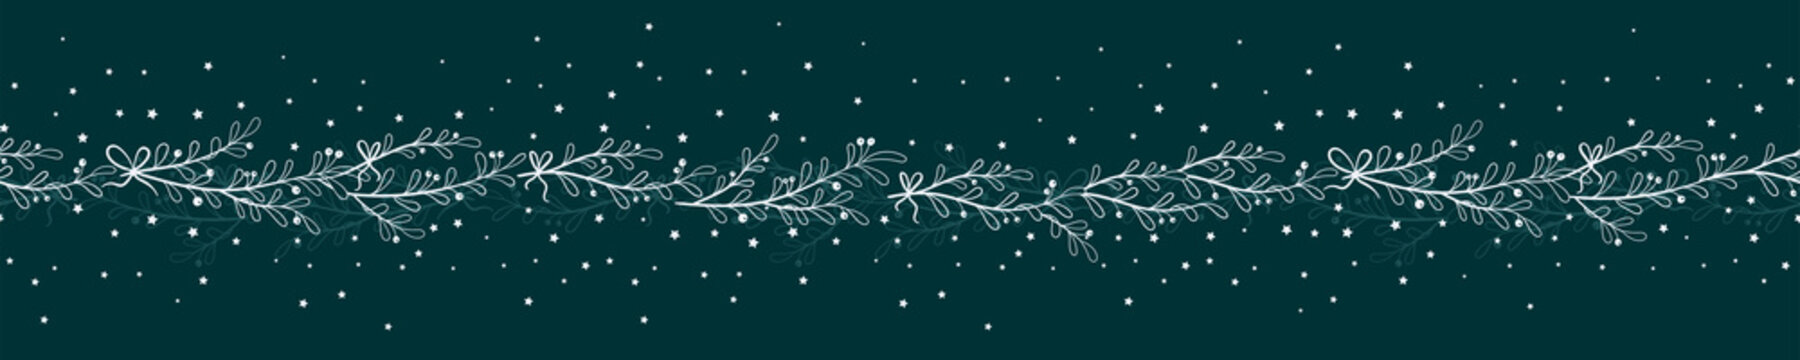 Fun hand drawn christmas branches seamless pattern with stars and ribbons - vector surface design